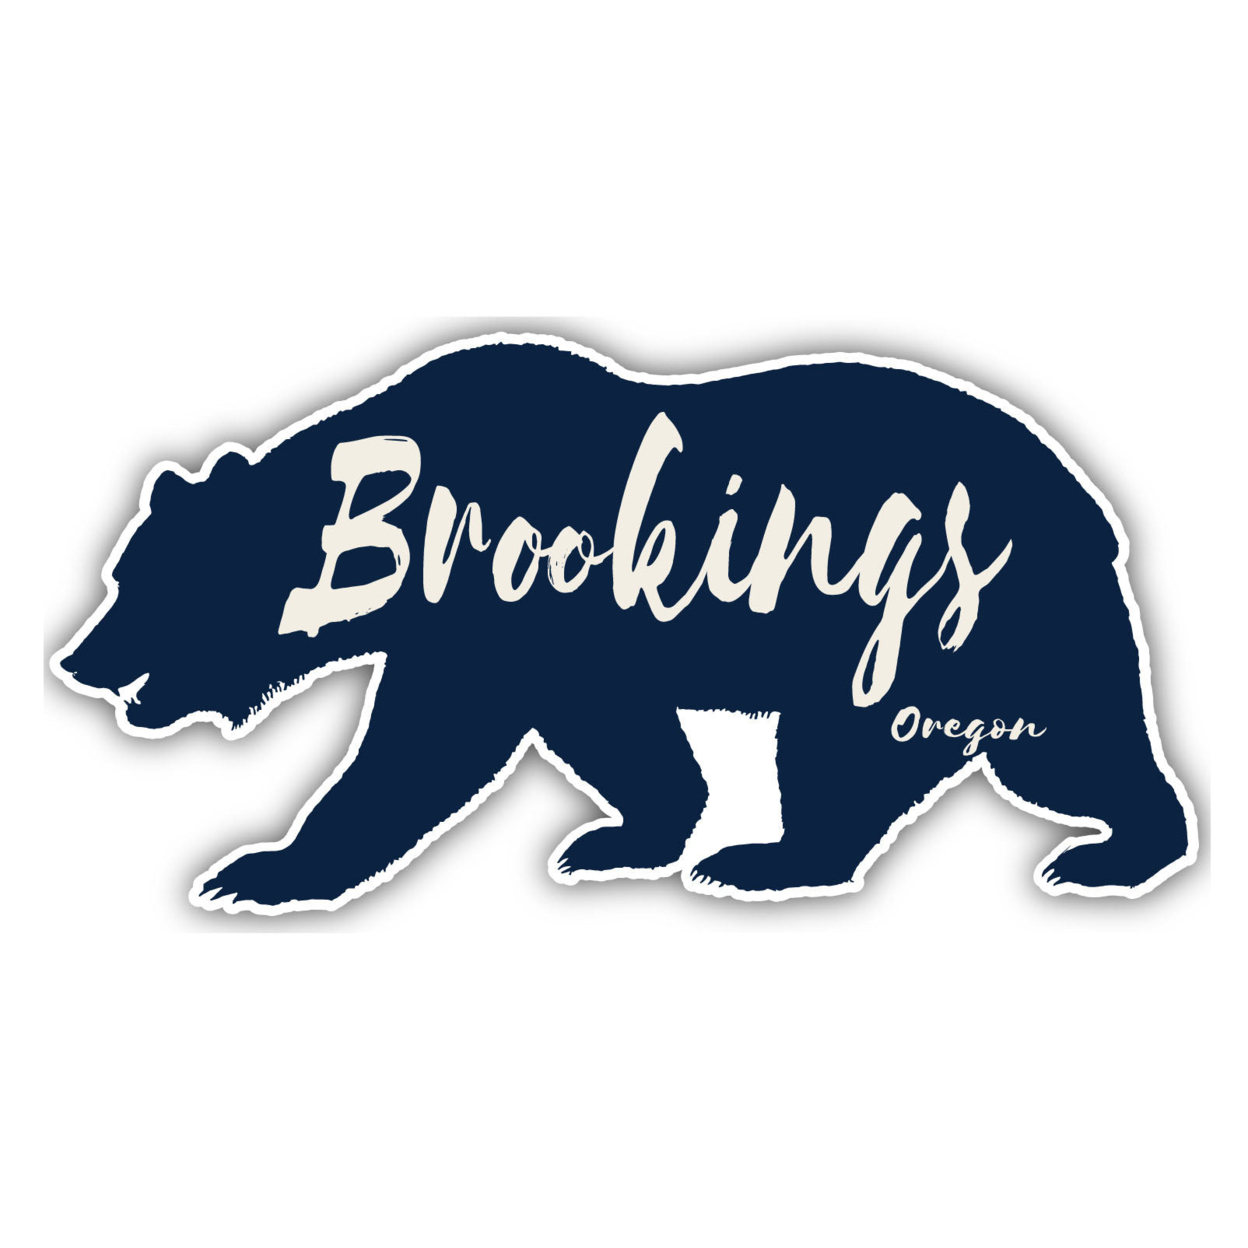 Brookings Oregon Souvenir Decorative Stickers (Choose Theme And Size) - 4-Pack, 2-Inch, Bear